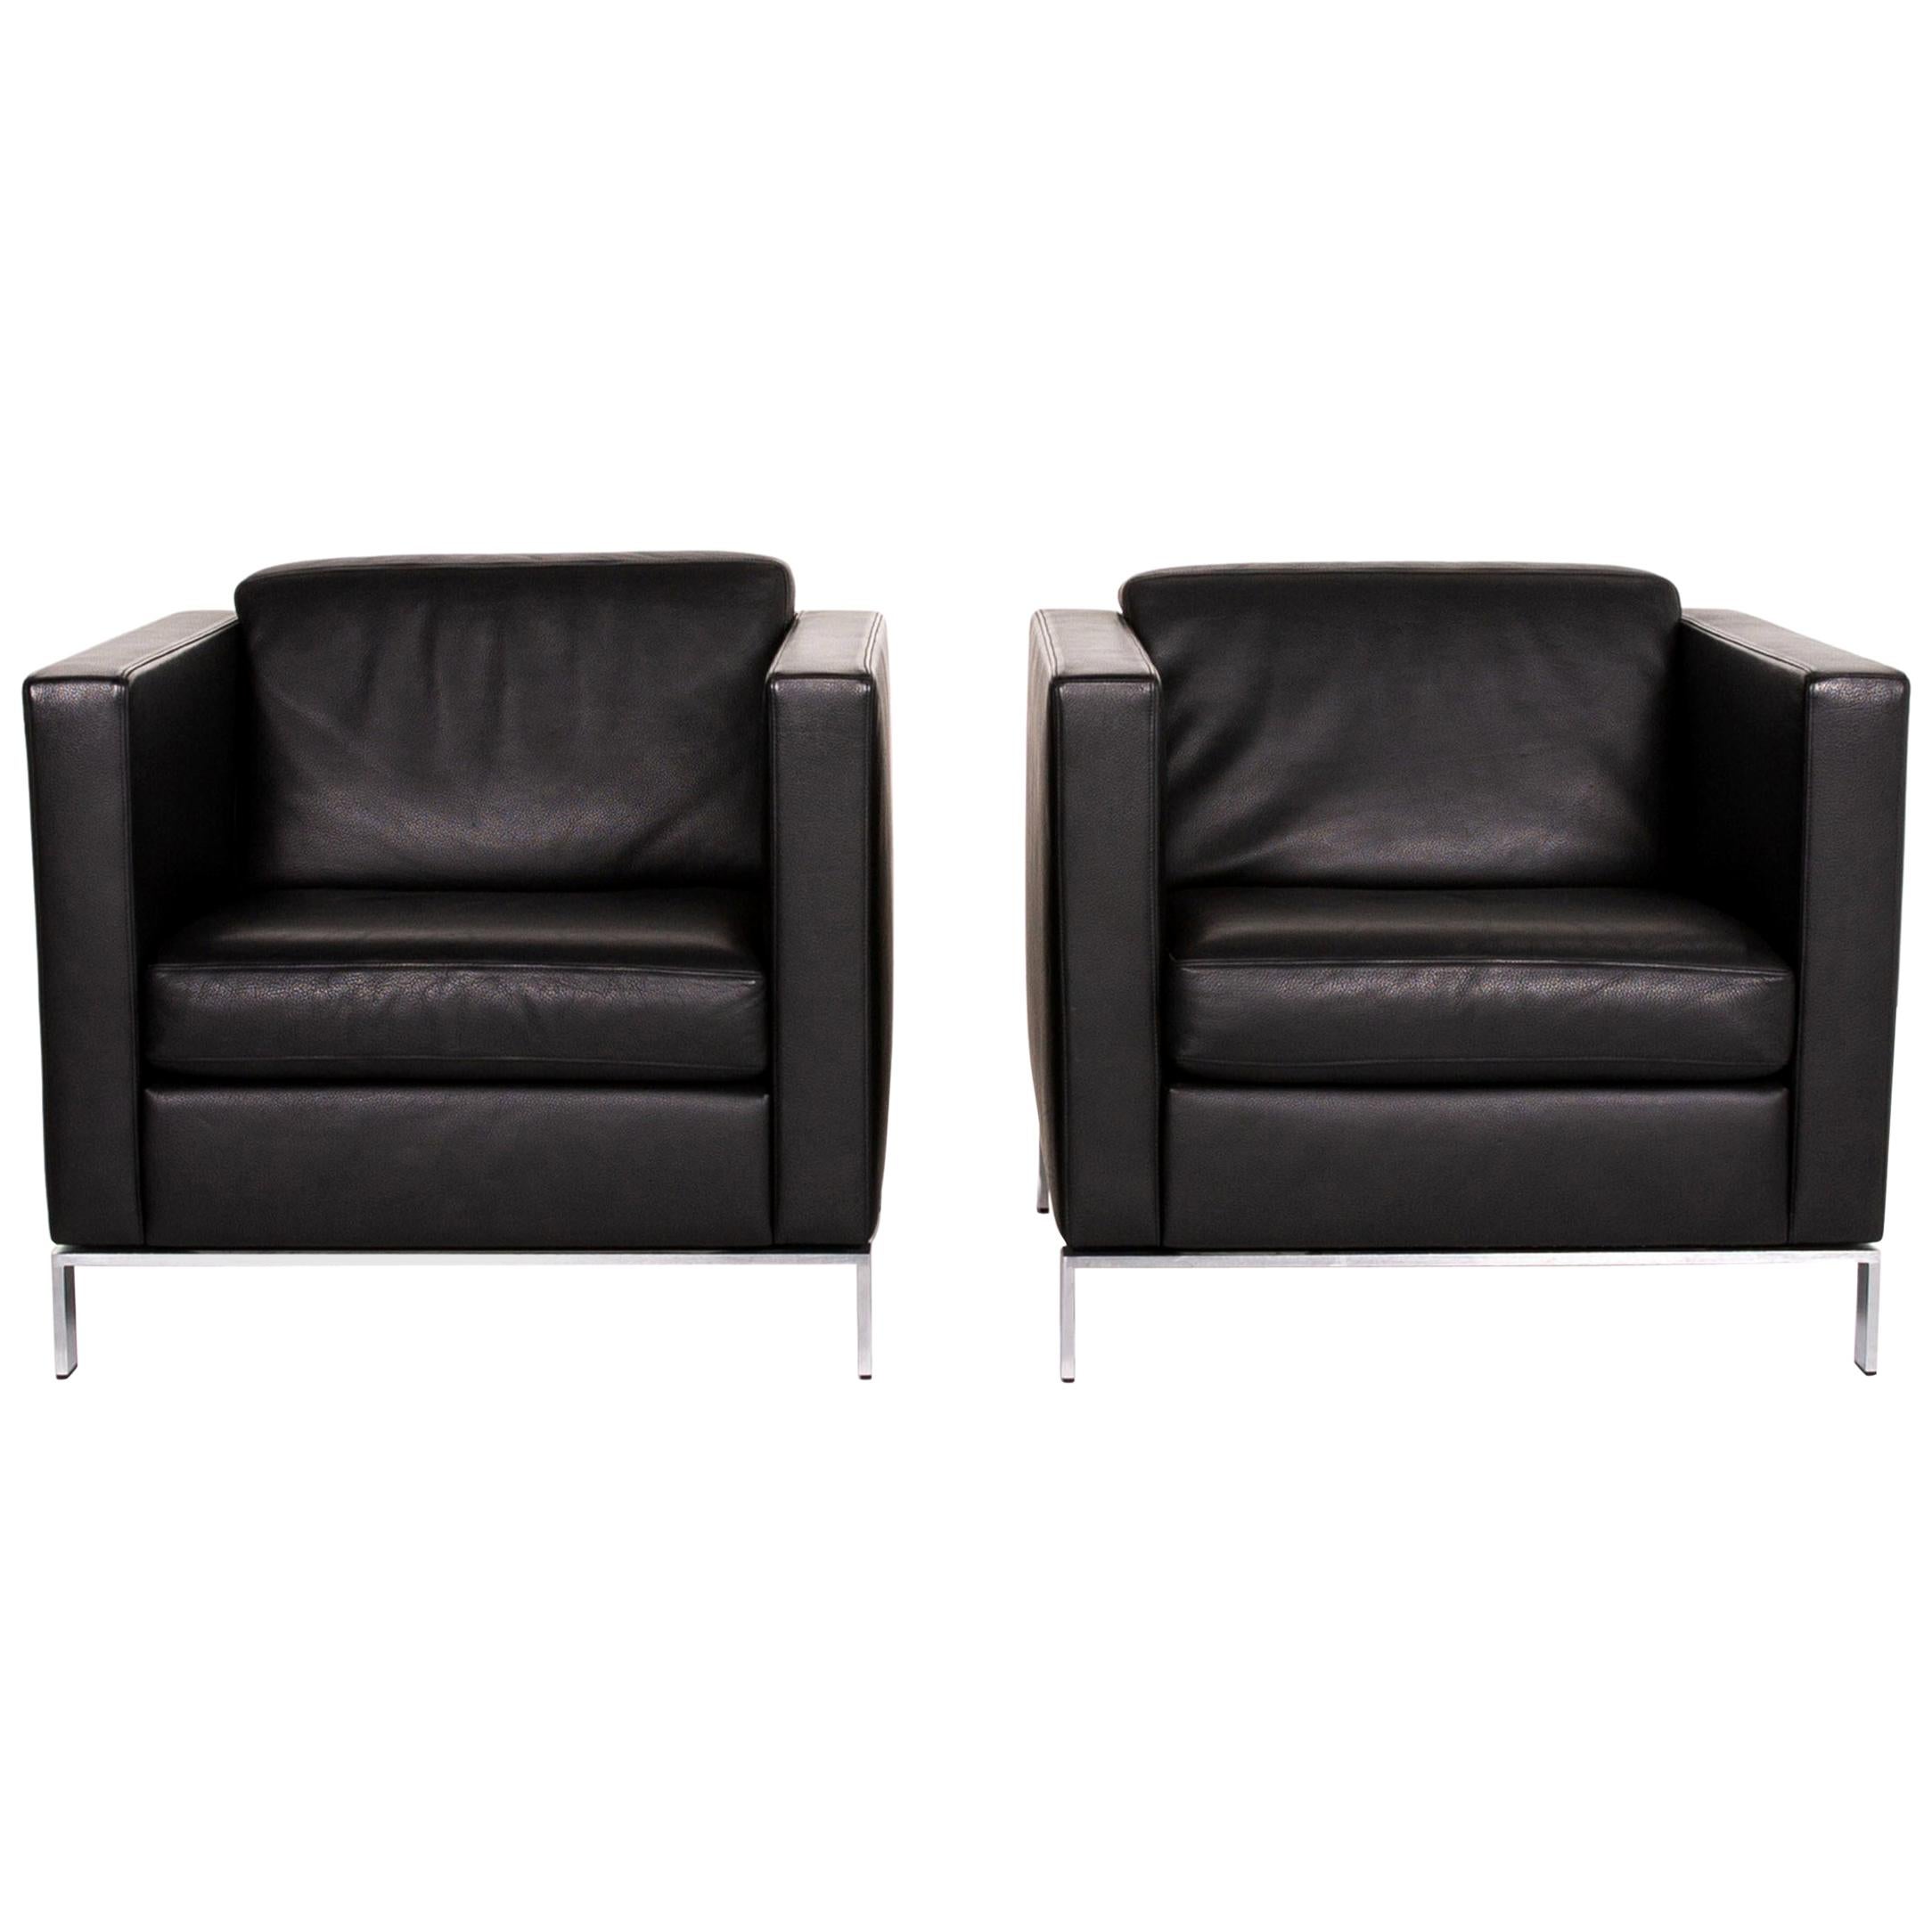 Walter Knoll Foster 500 Leather Armchair Set Black 2 Armchairs For Sale